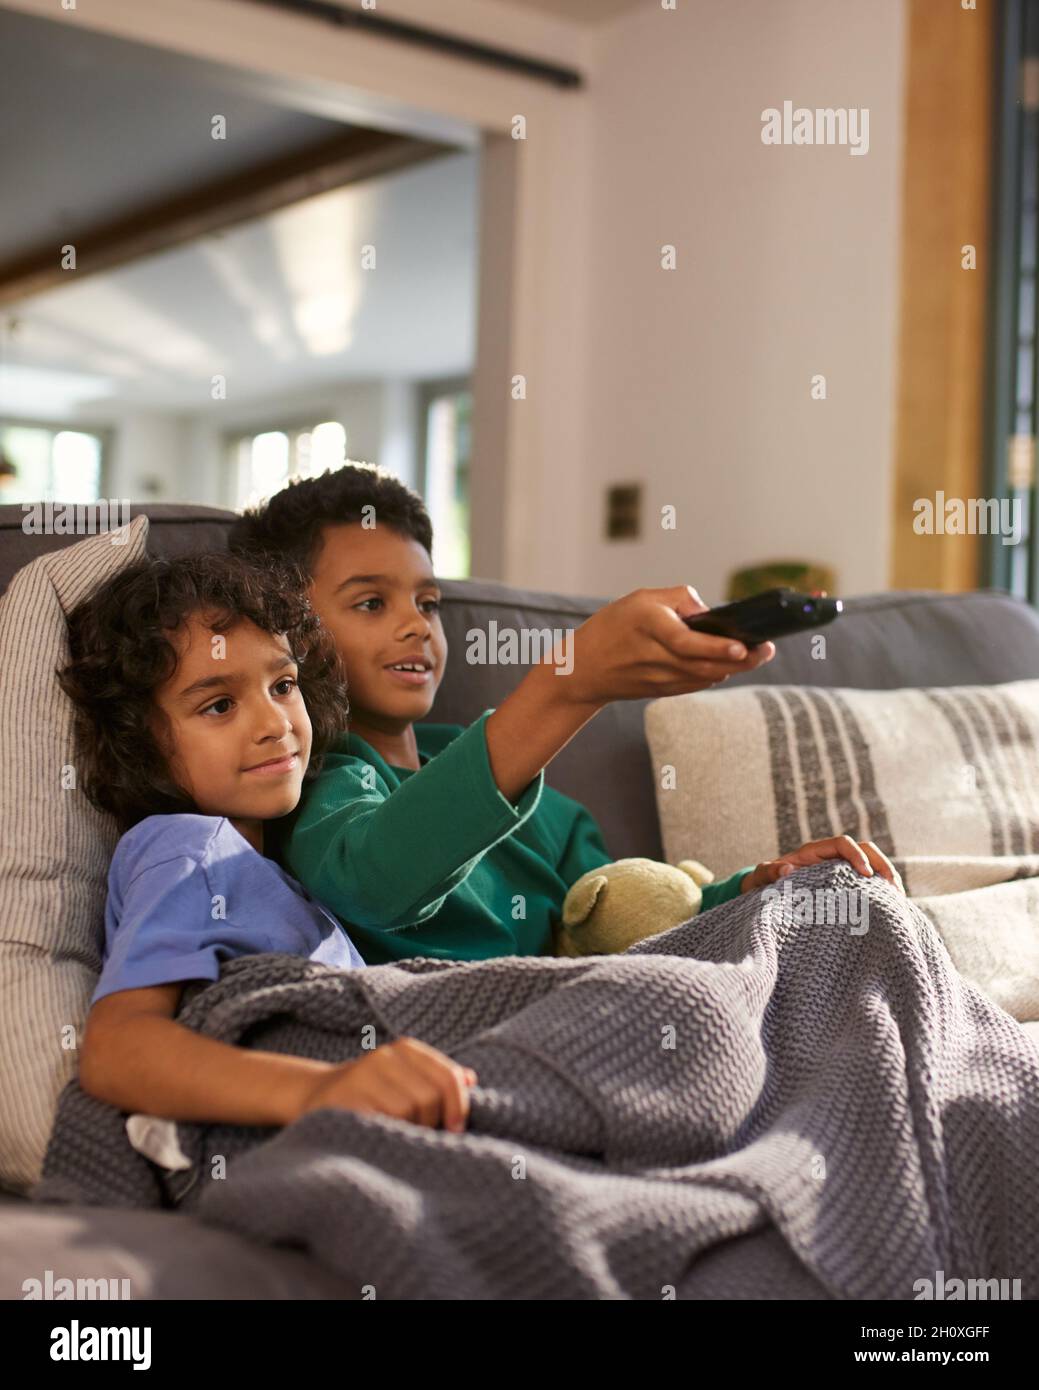 Two cheerful boys watching TV using remote control Stock Photo